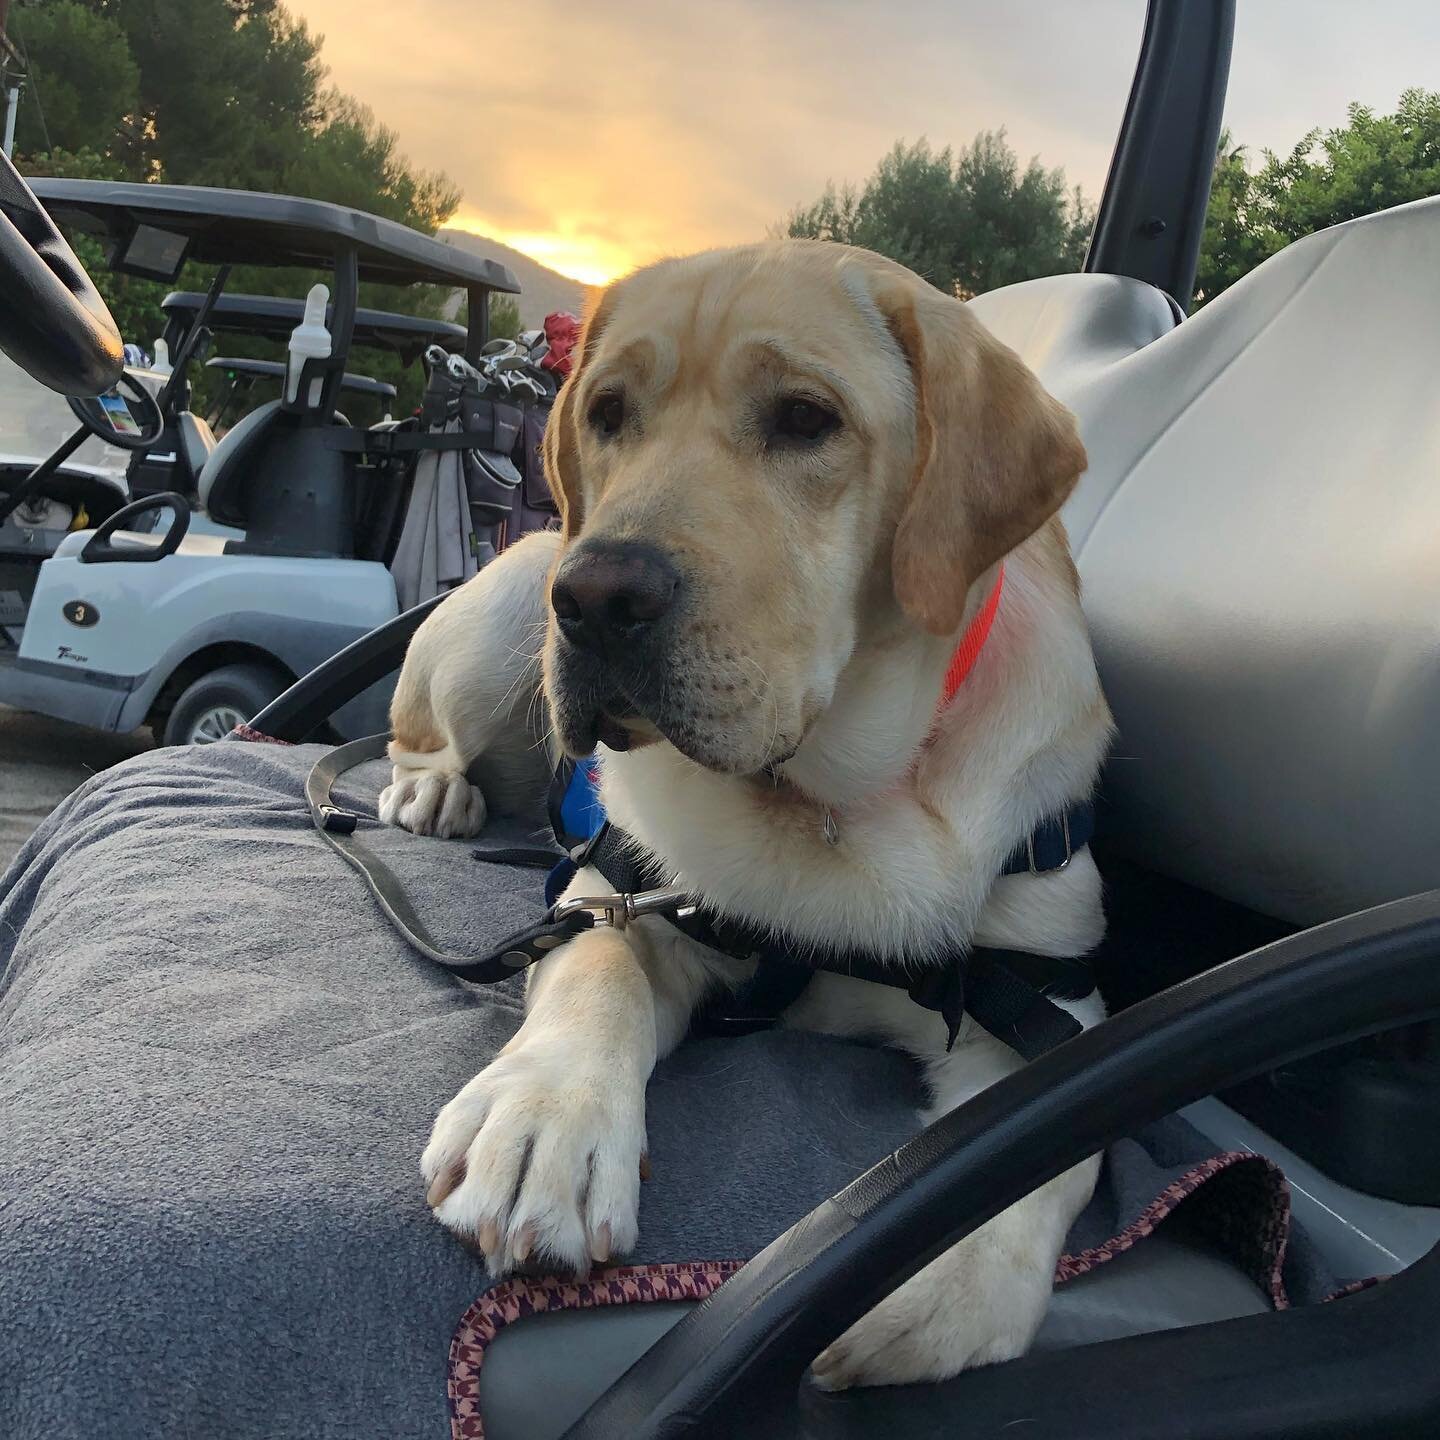 Chance&rsquo;s day on the golf course ⛳️

Eyes are always on the prize (golf ball) 👀 🦮

Please click on the link in our bio to learn more about how our specialty - trained service dogs are helping wounded military heroes overcome the challenges of 